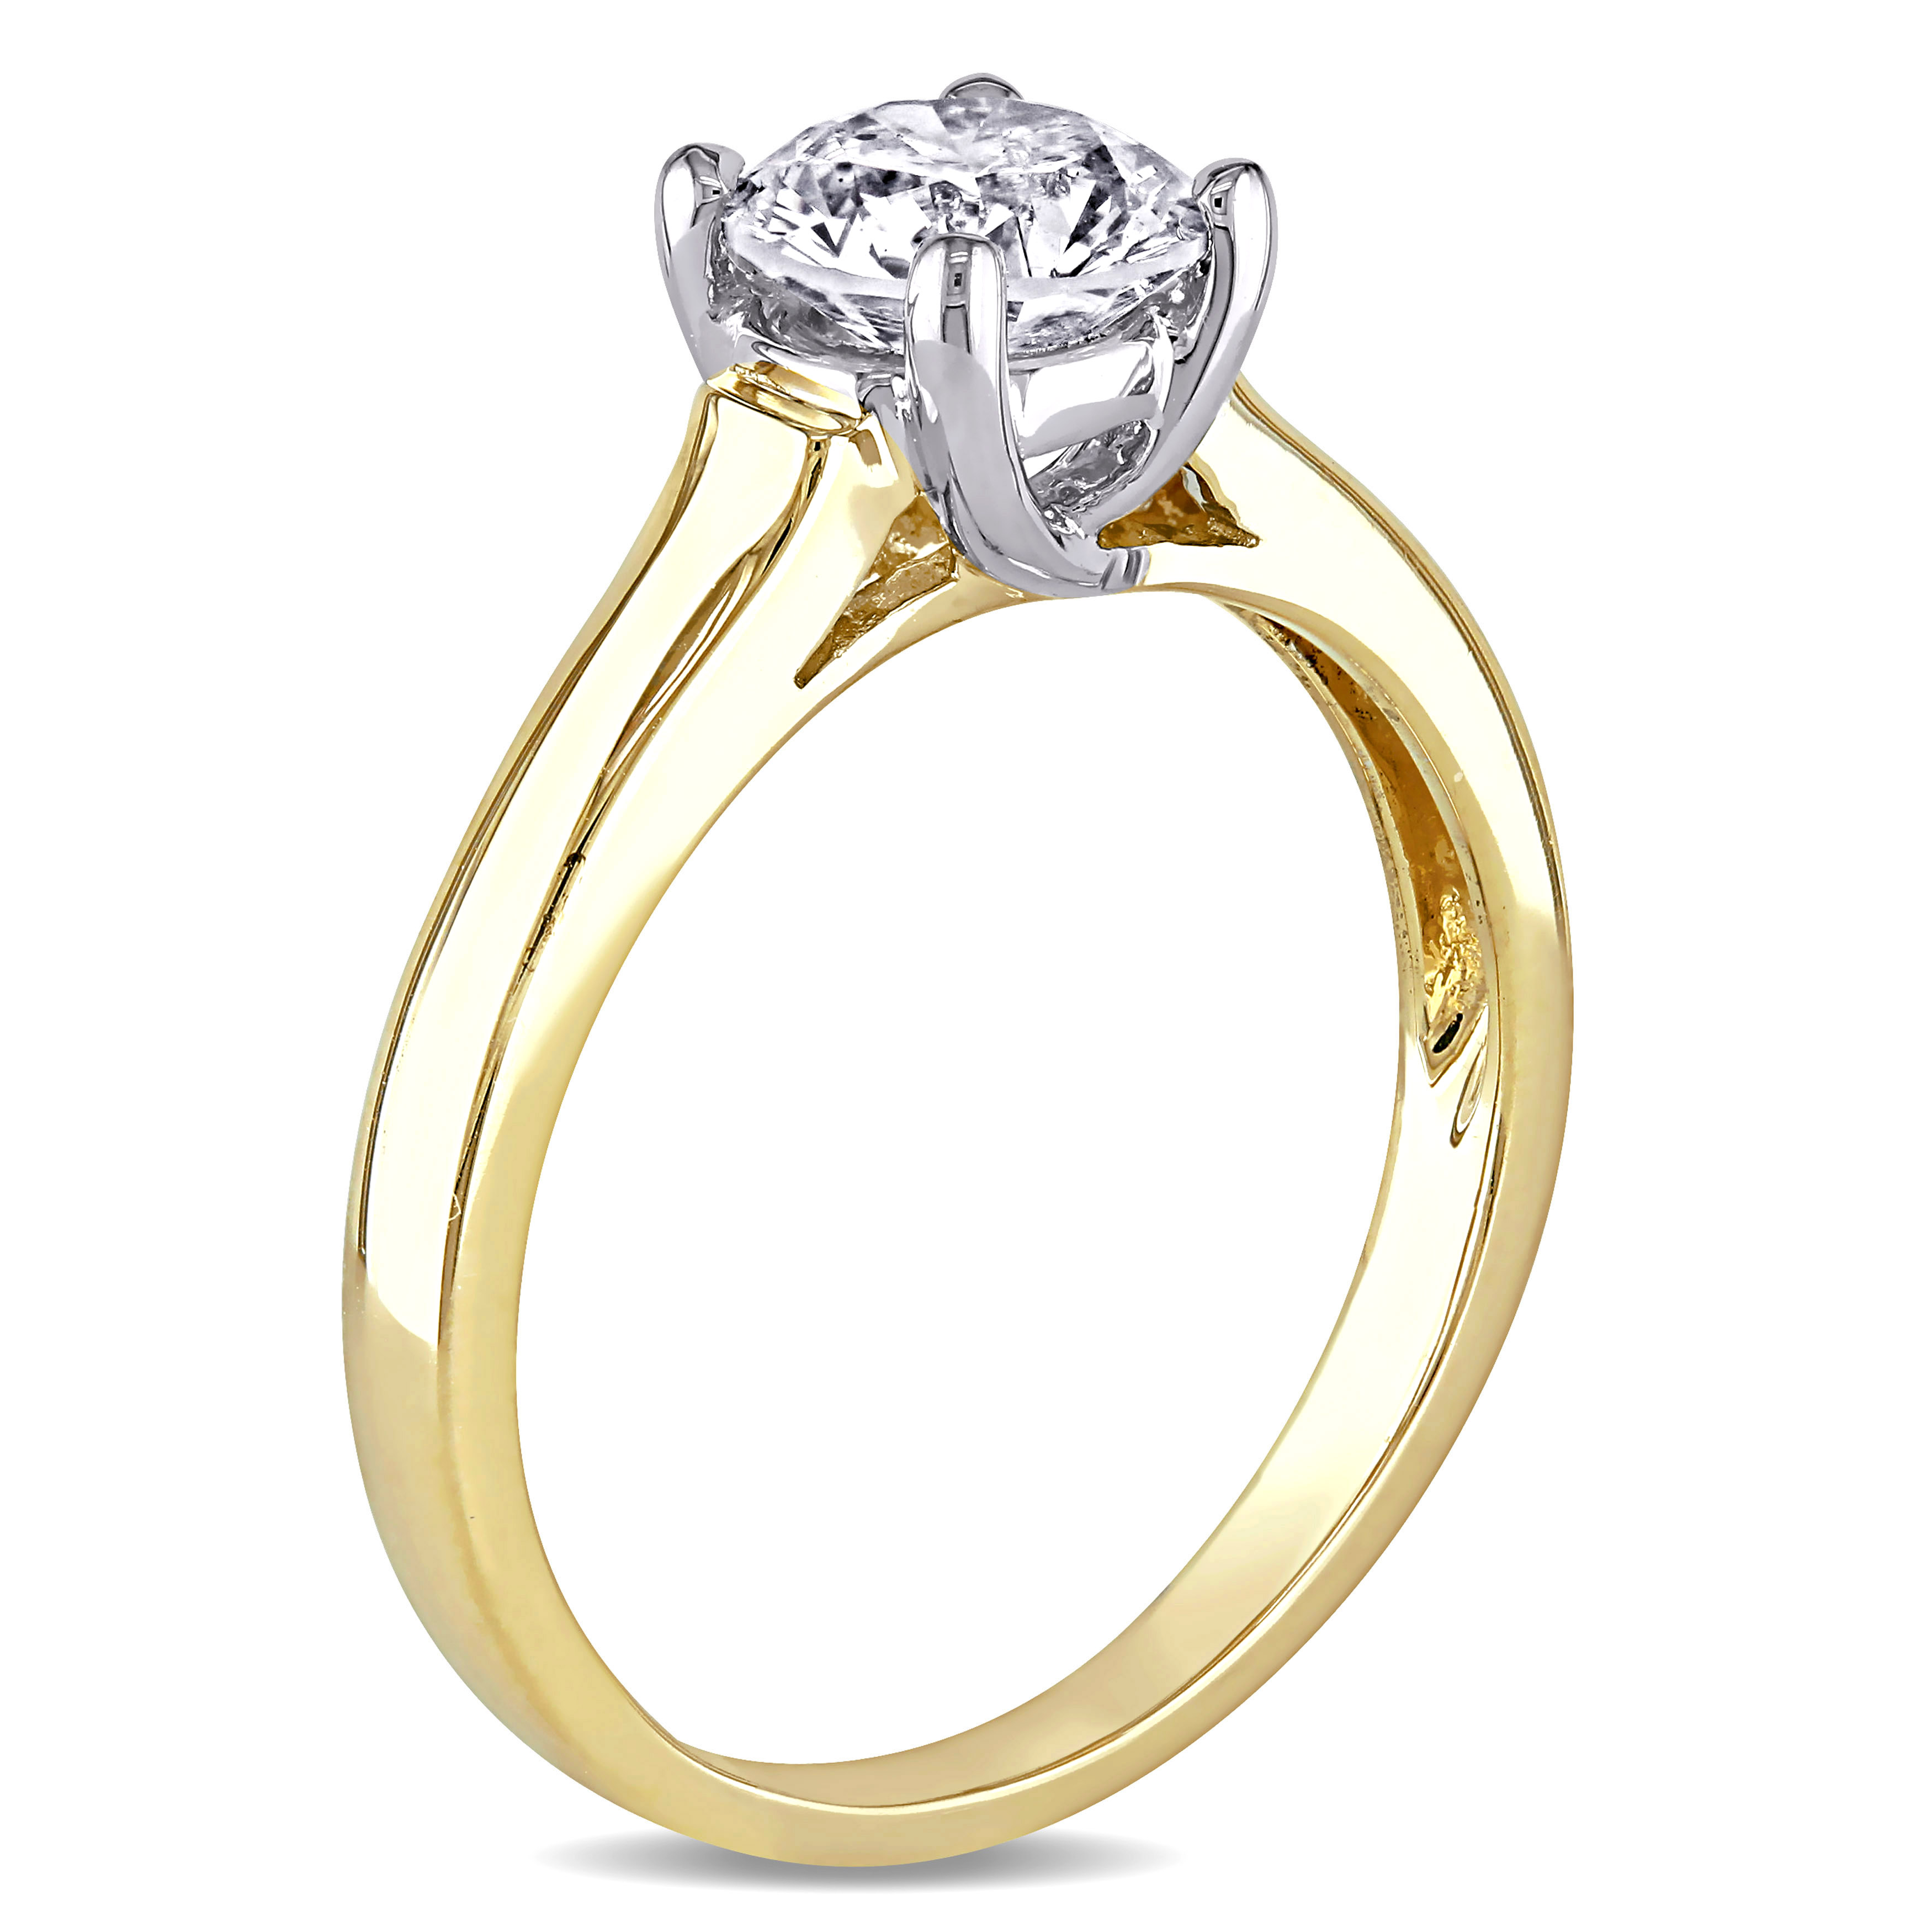 Amour 1 CT TW Diamond Solitaire Ring in 14k Yellow Gold eBay